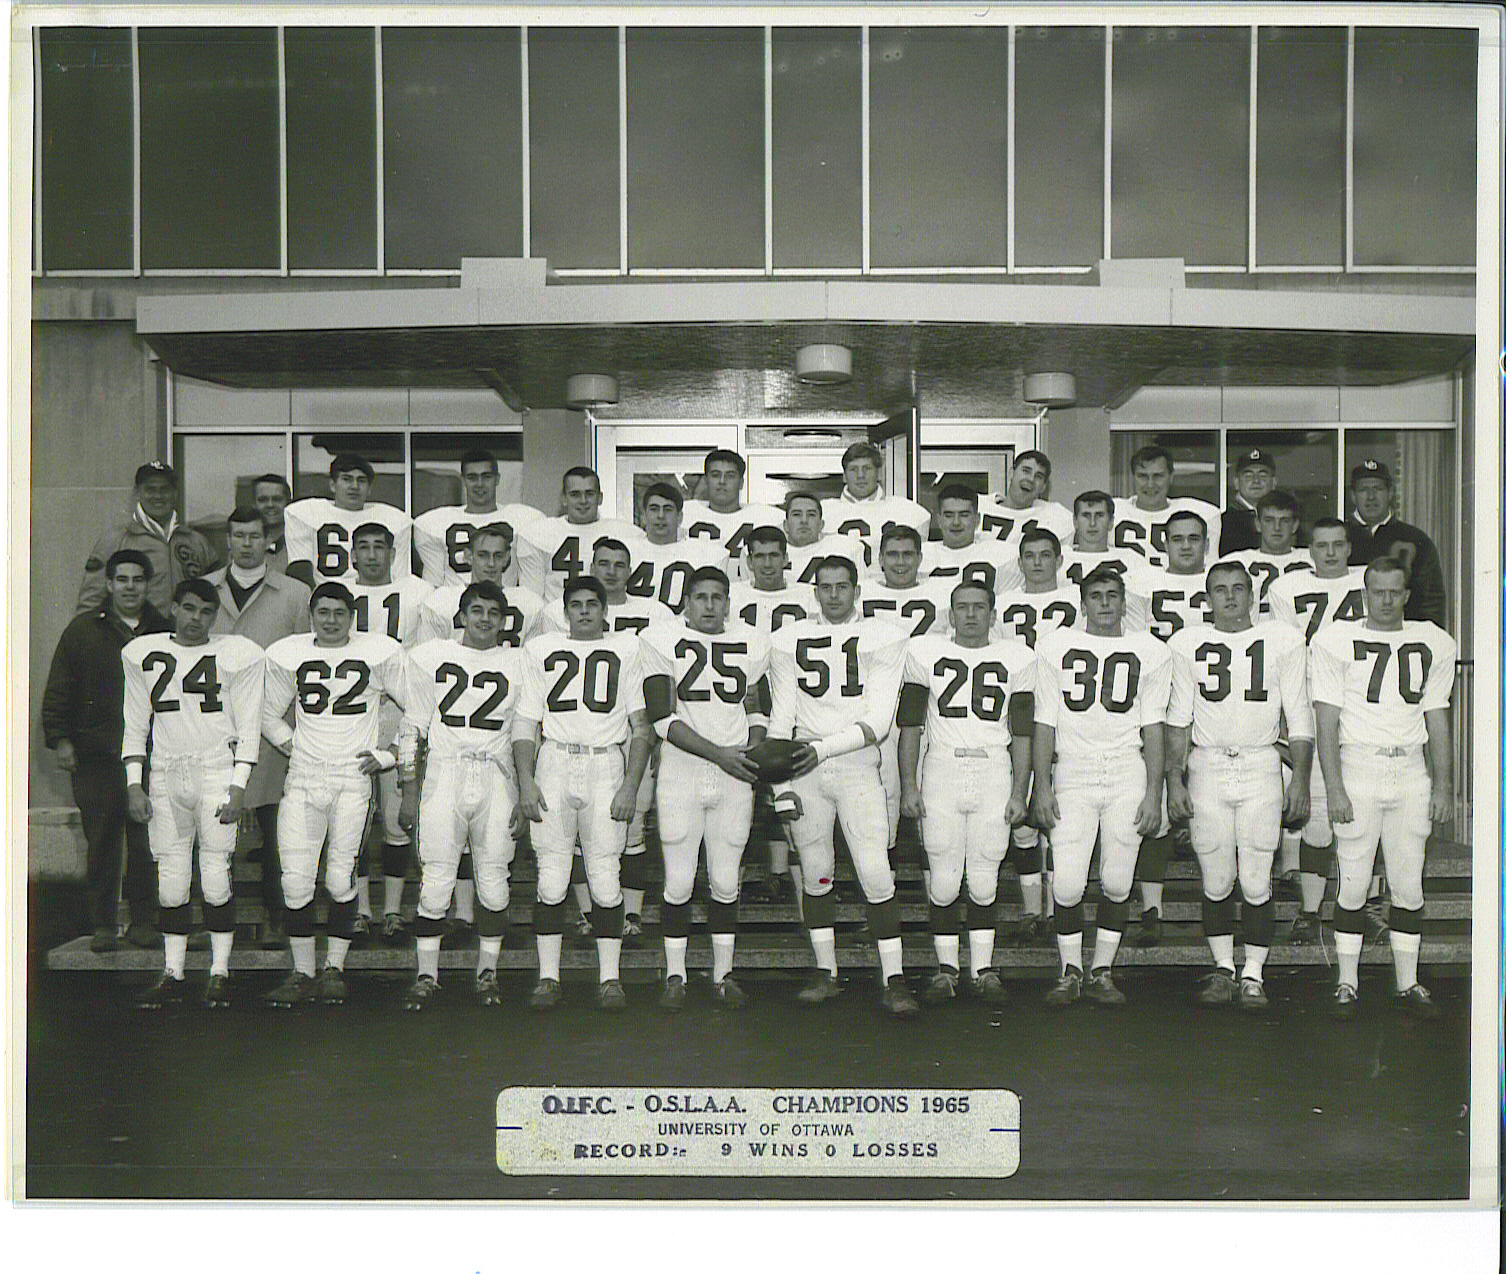 Black and white team photo of football players in four rows. A sticker at the bottom reads: OIFC-OSLAA Champions 1965. University of Ottawa. Record: 9 wins 0 losses.